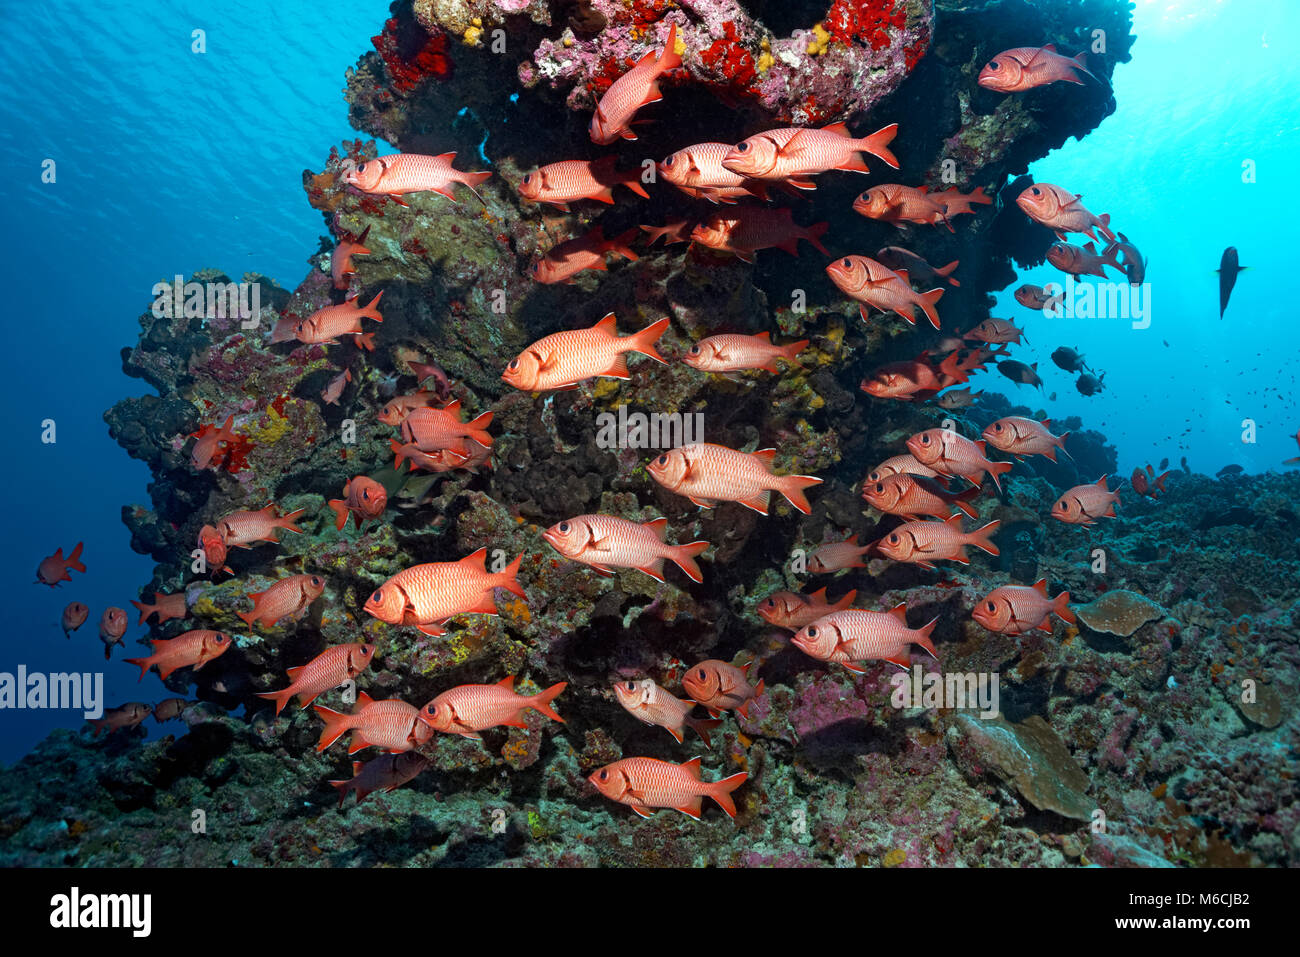 Swarm Pinecone soldierfishes (Myripristis murdjan) at the reef, Pacific Ocean, French Polynesia Stock Photo